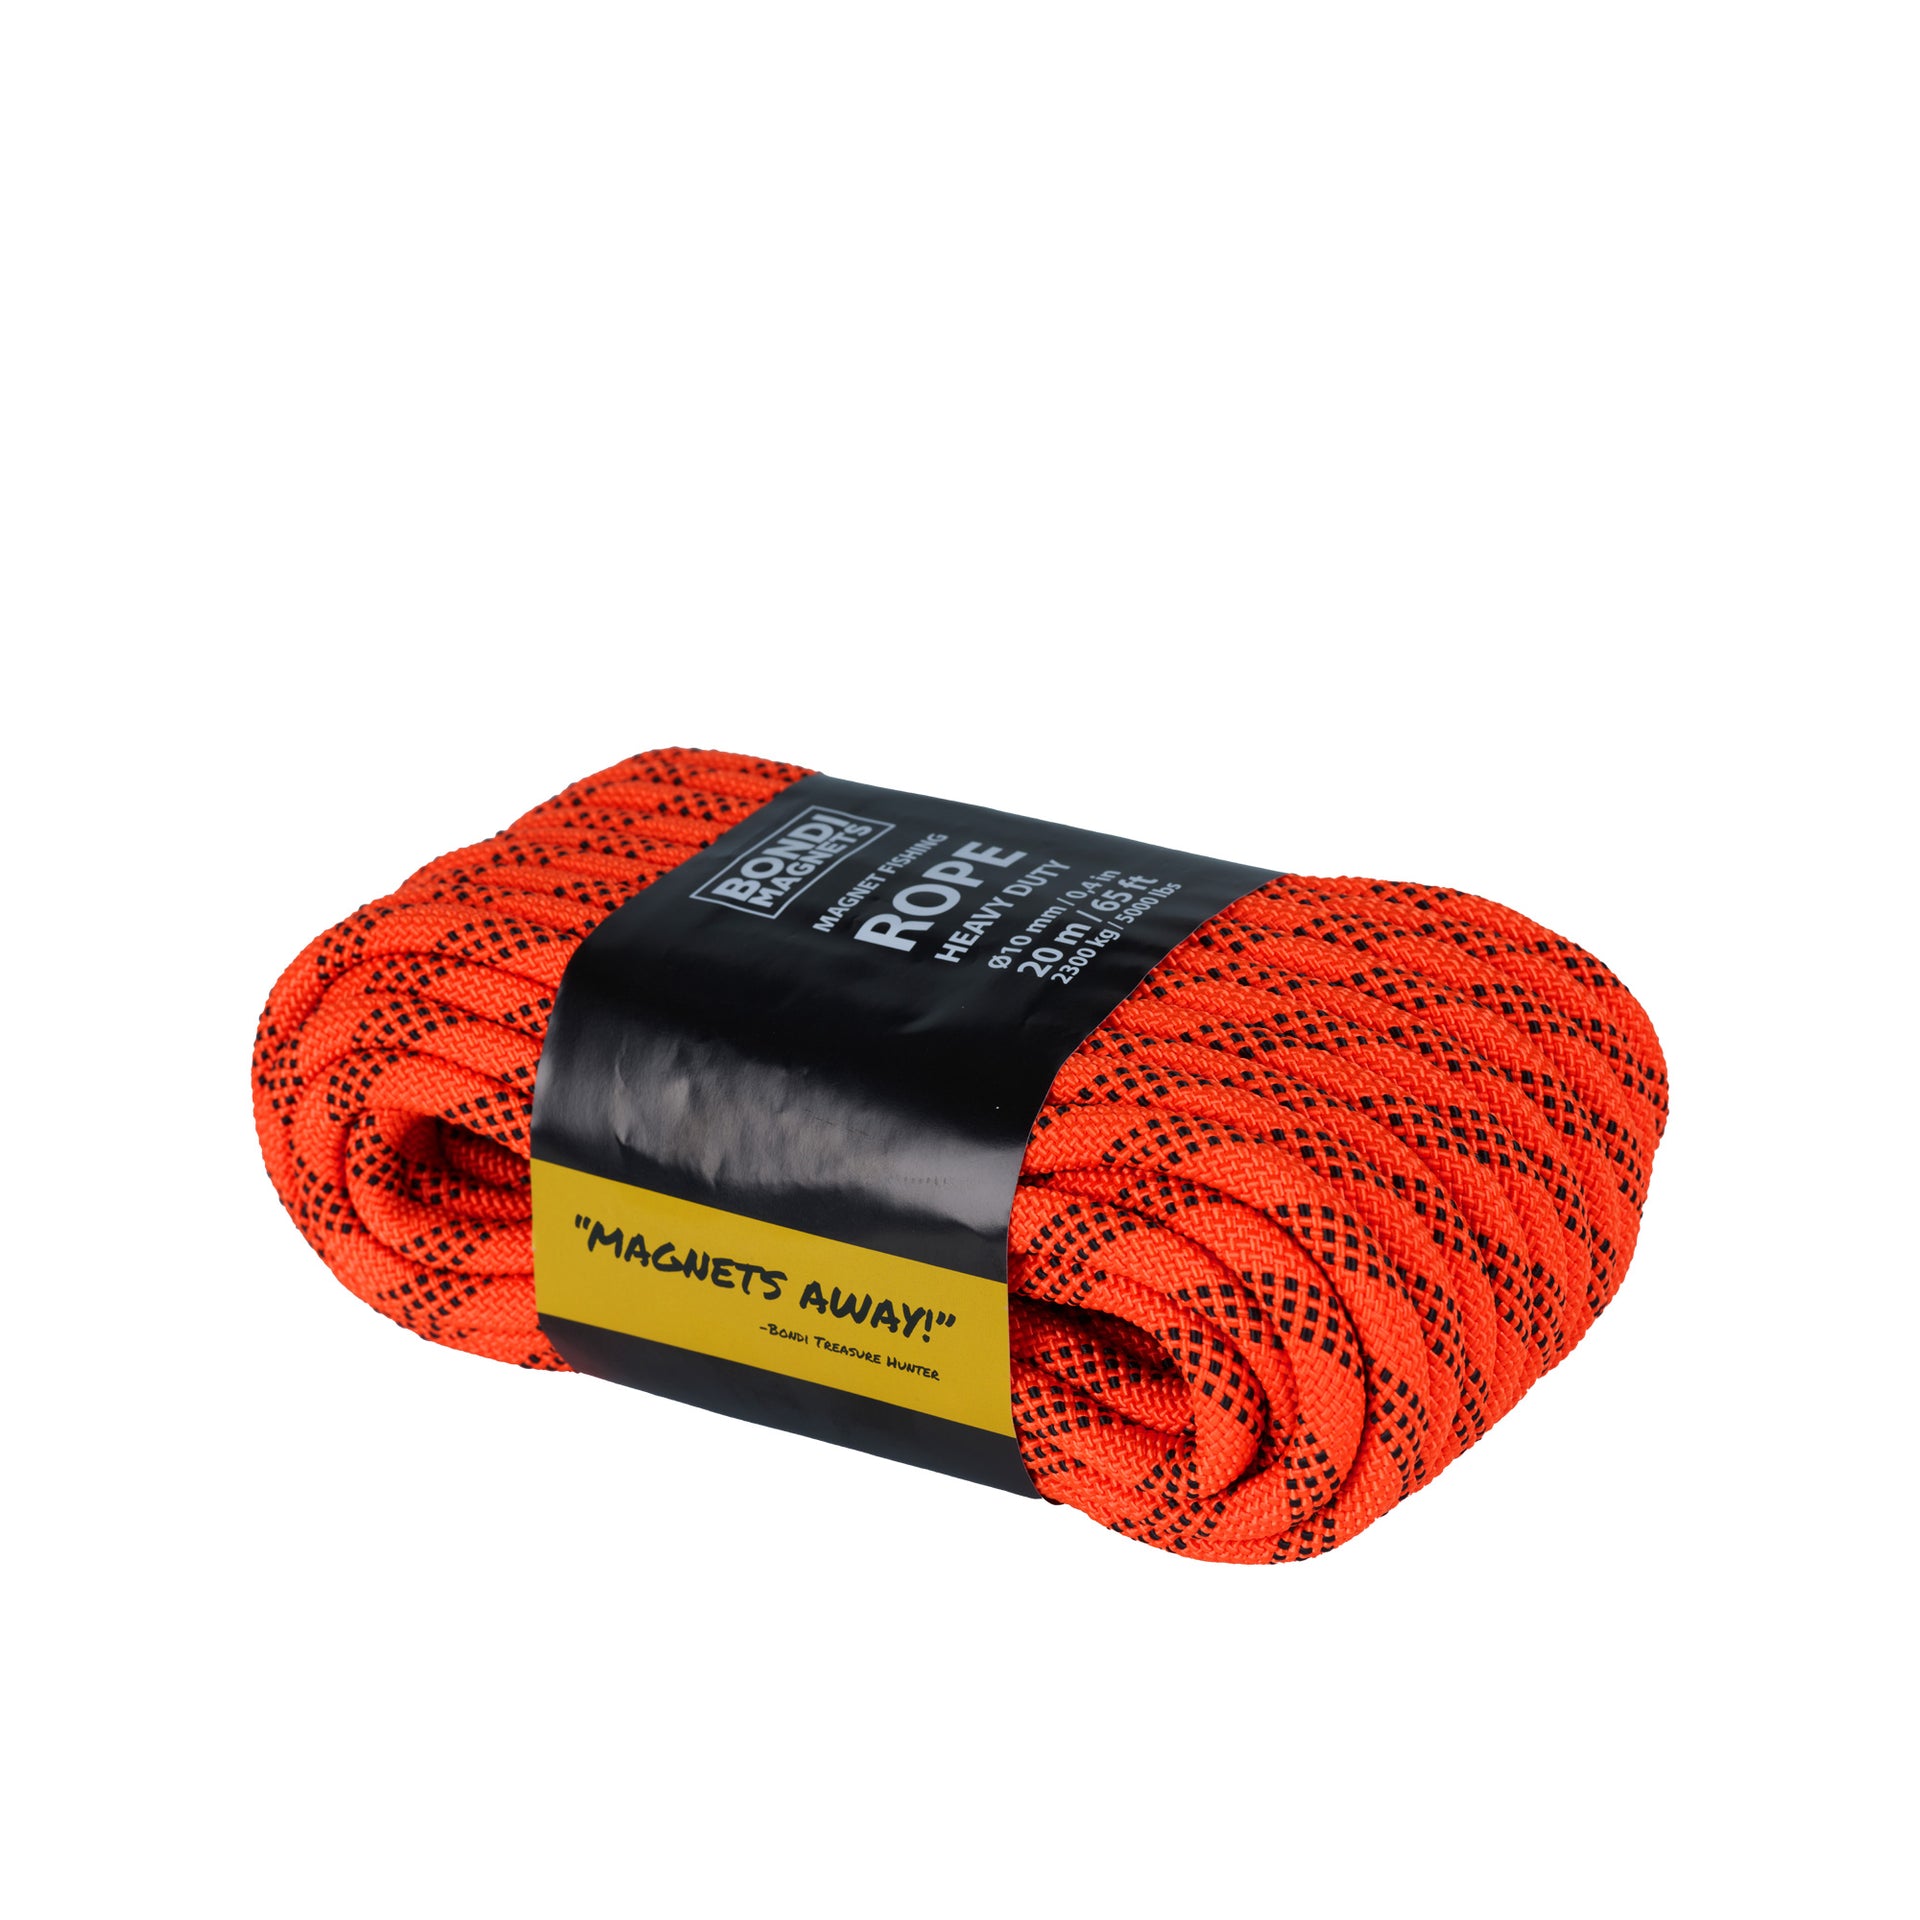 100 FT Double Braided Magnet Fishing Rope 8mm with Carabiner